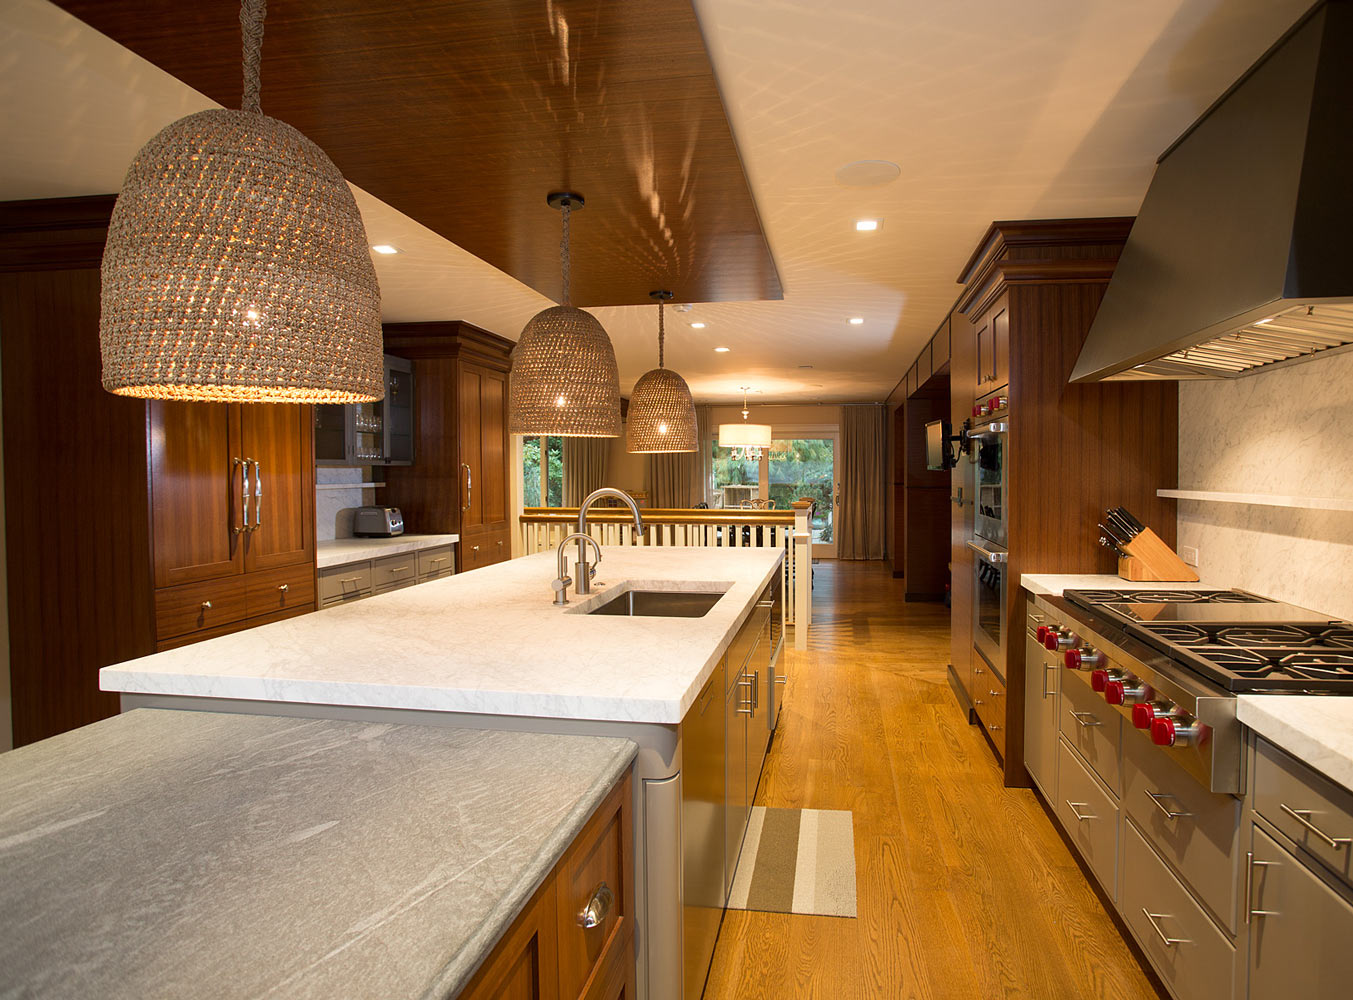 Kitchen interiors in Roslyn designed by Annette Jaffe Interiors